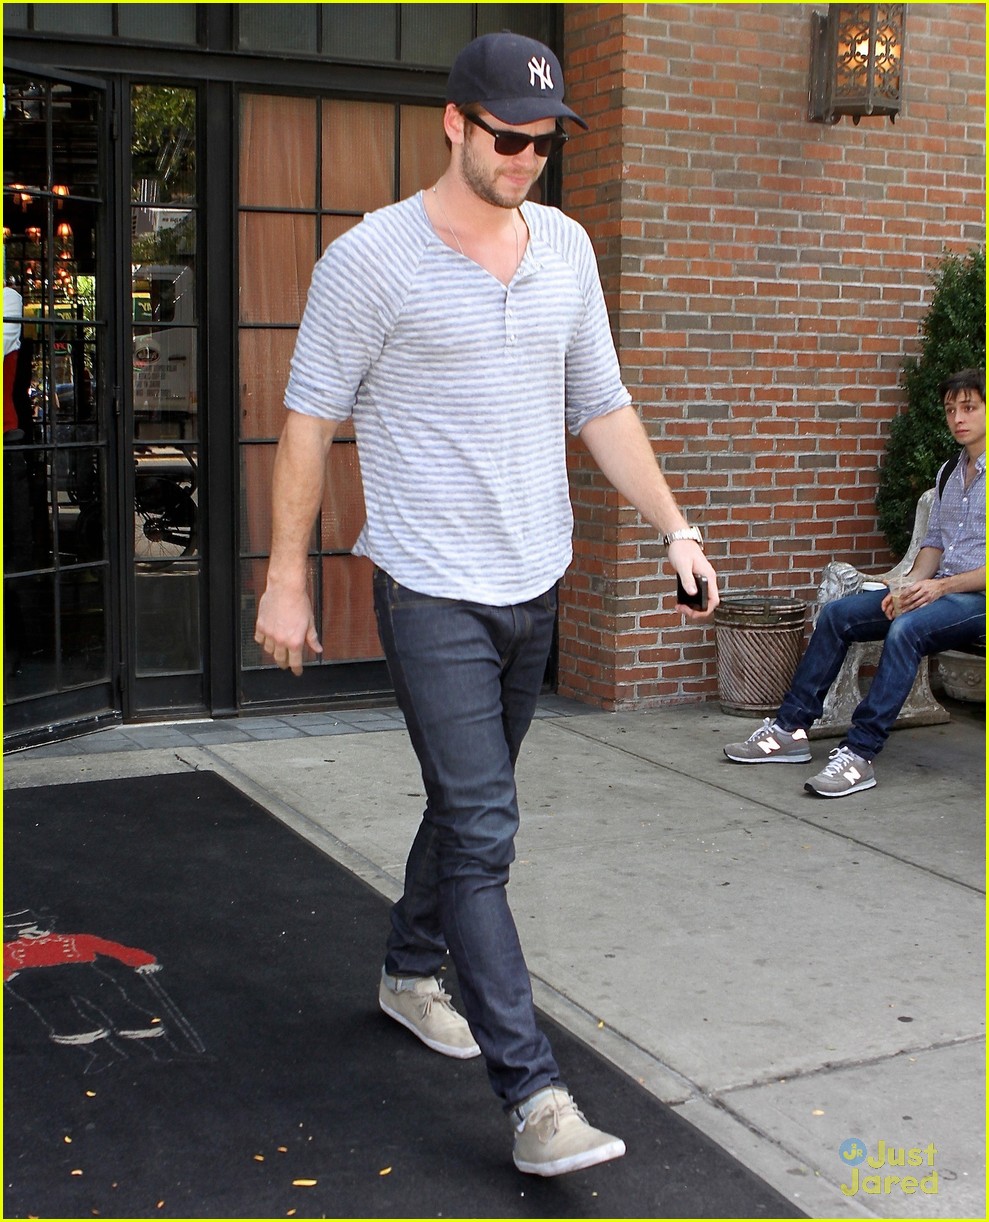 Liam Hemsworth: 'Paranoia' Out on DVD in November! | Photo 603379 ...